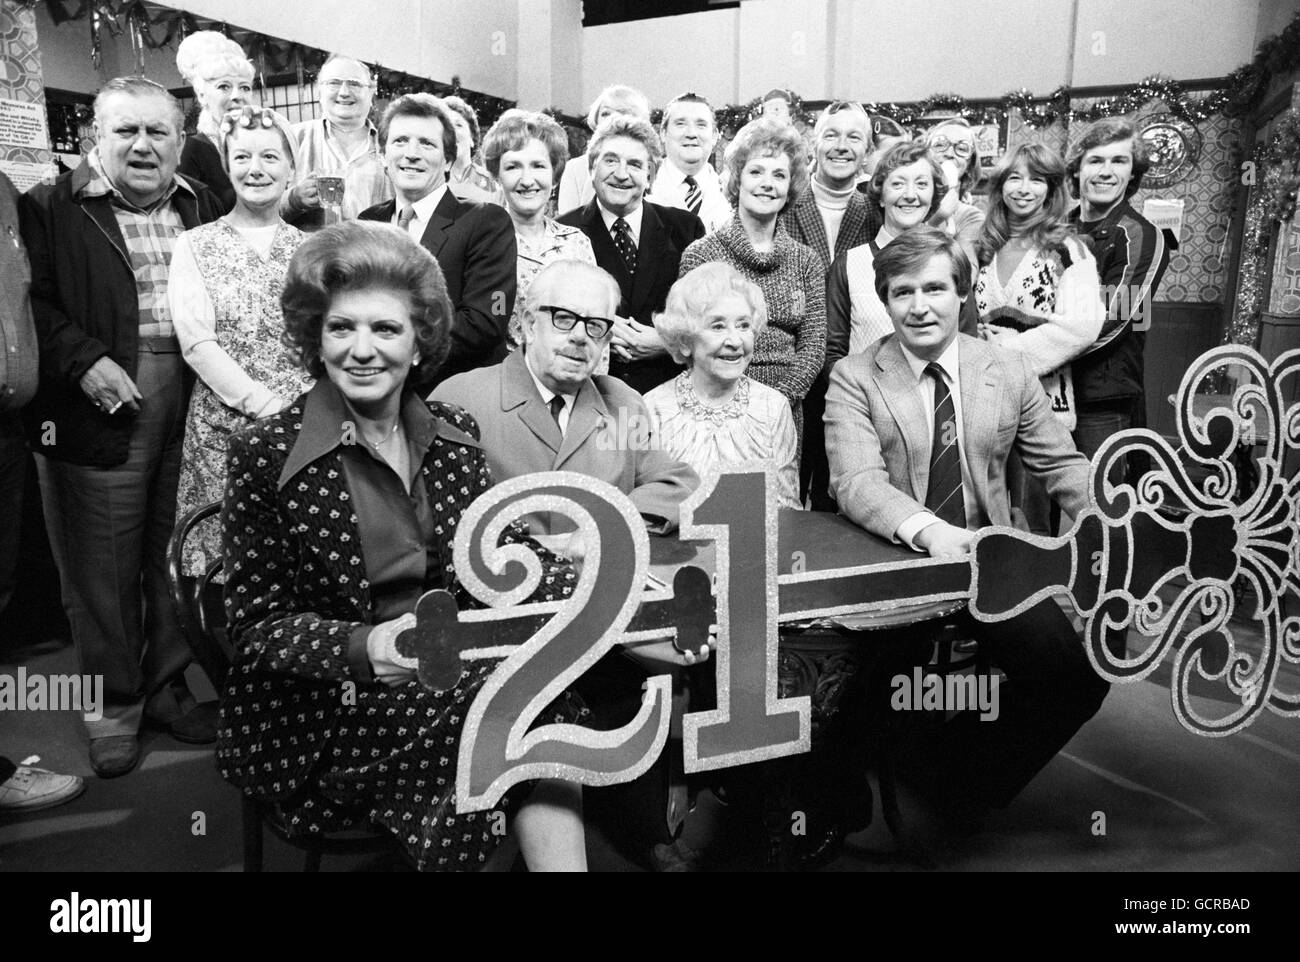 A giant 21st birthday key for Granada TV's cast of Coronation Street, celebrating the soap opera's 21st birthday in the interior set of the Rover's Return at Granada Studios, Manchester. Foreground, left to right, Pat Phoenix, Jack Howarth, Doris Speed and Bill Roache. Stock Photo